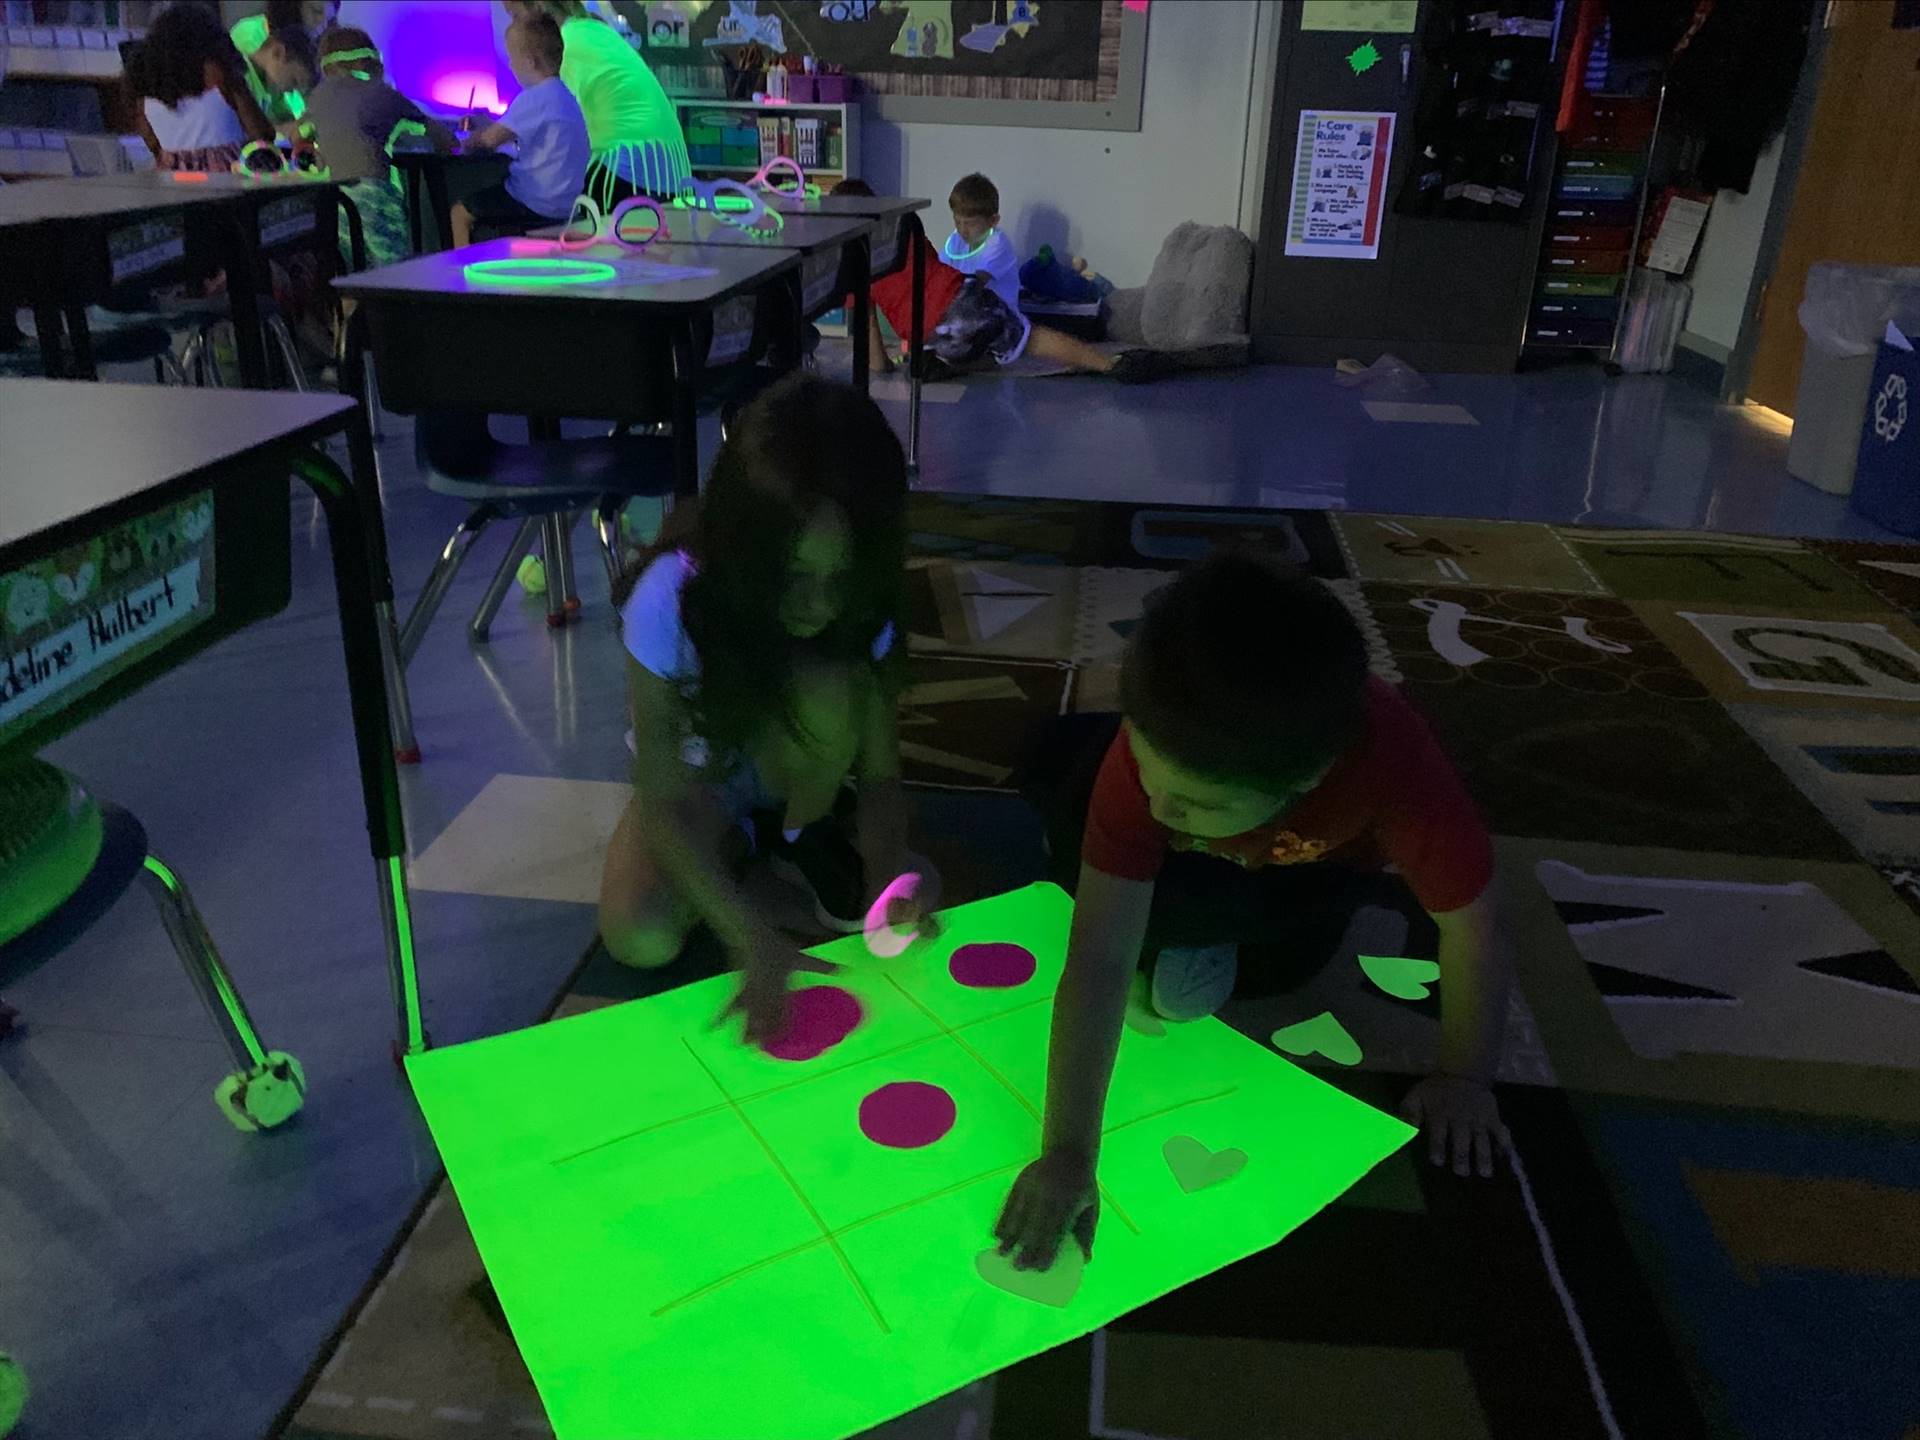 2 students playing on a neon game board